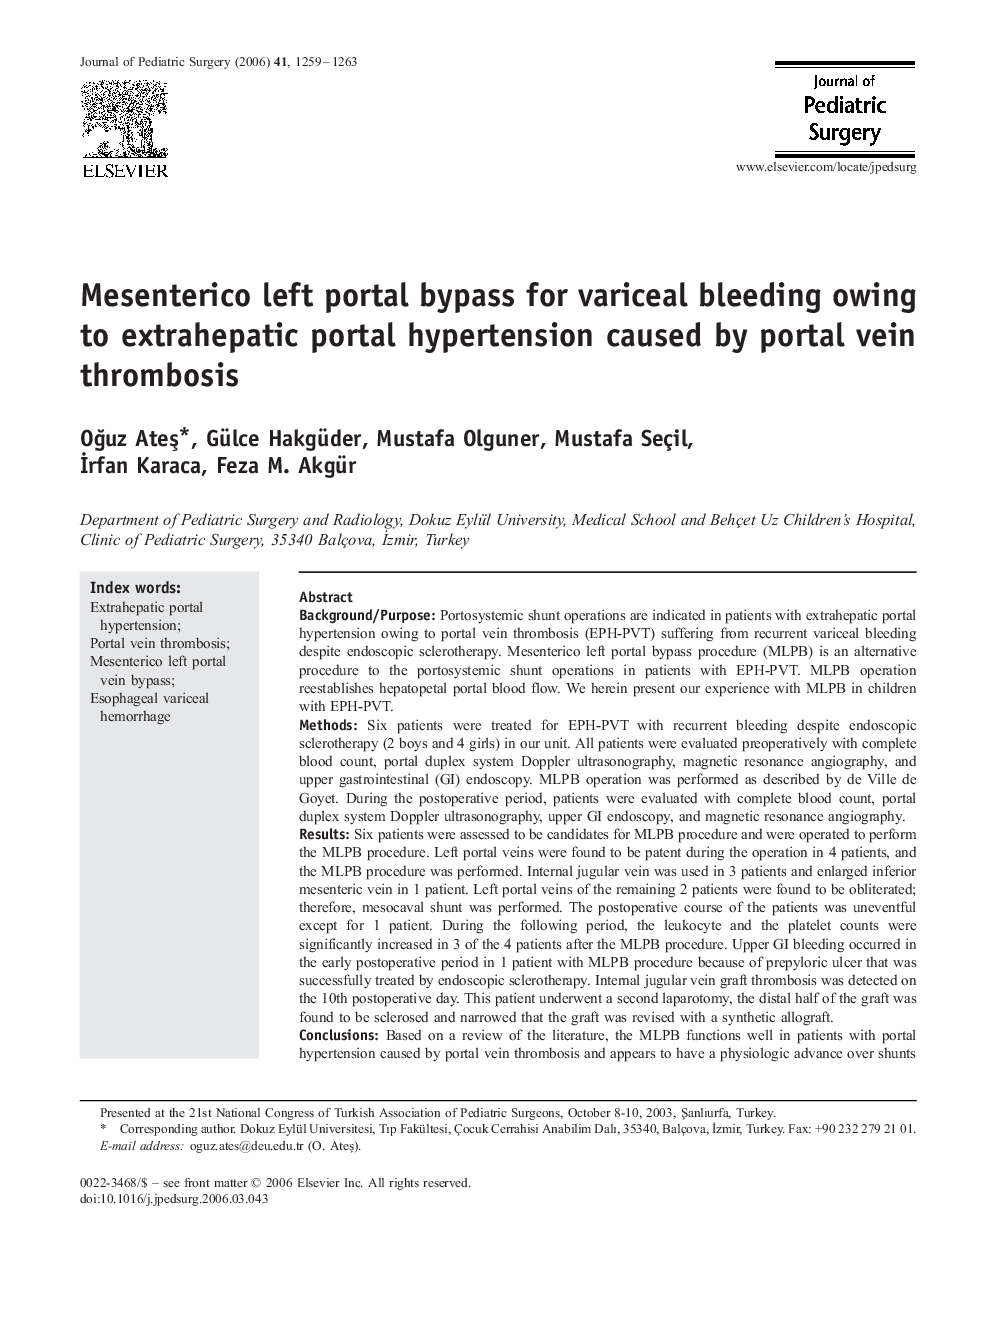 Mesenterico left portal bypass for variceal bleeding owing to extrahepatic portal hypertension caused by portal vein thrombosis 